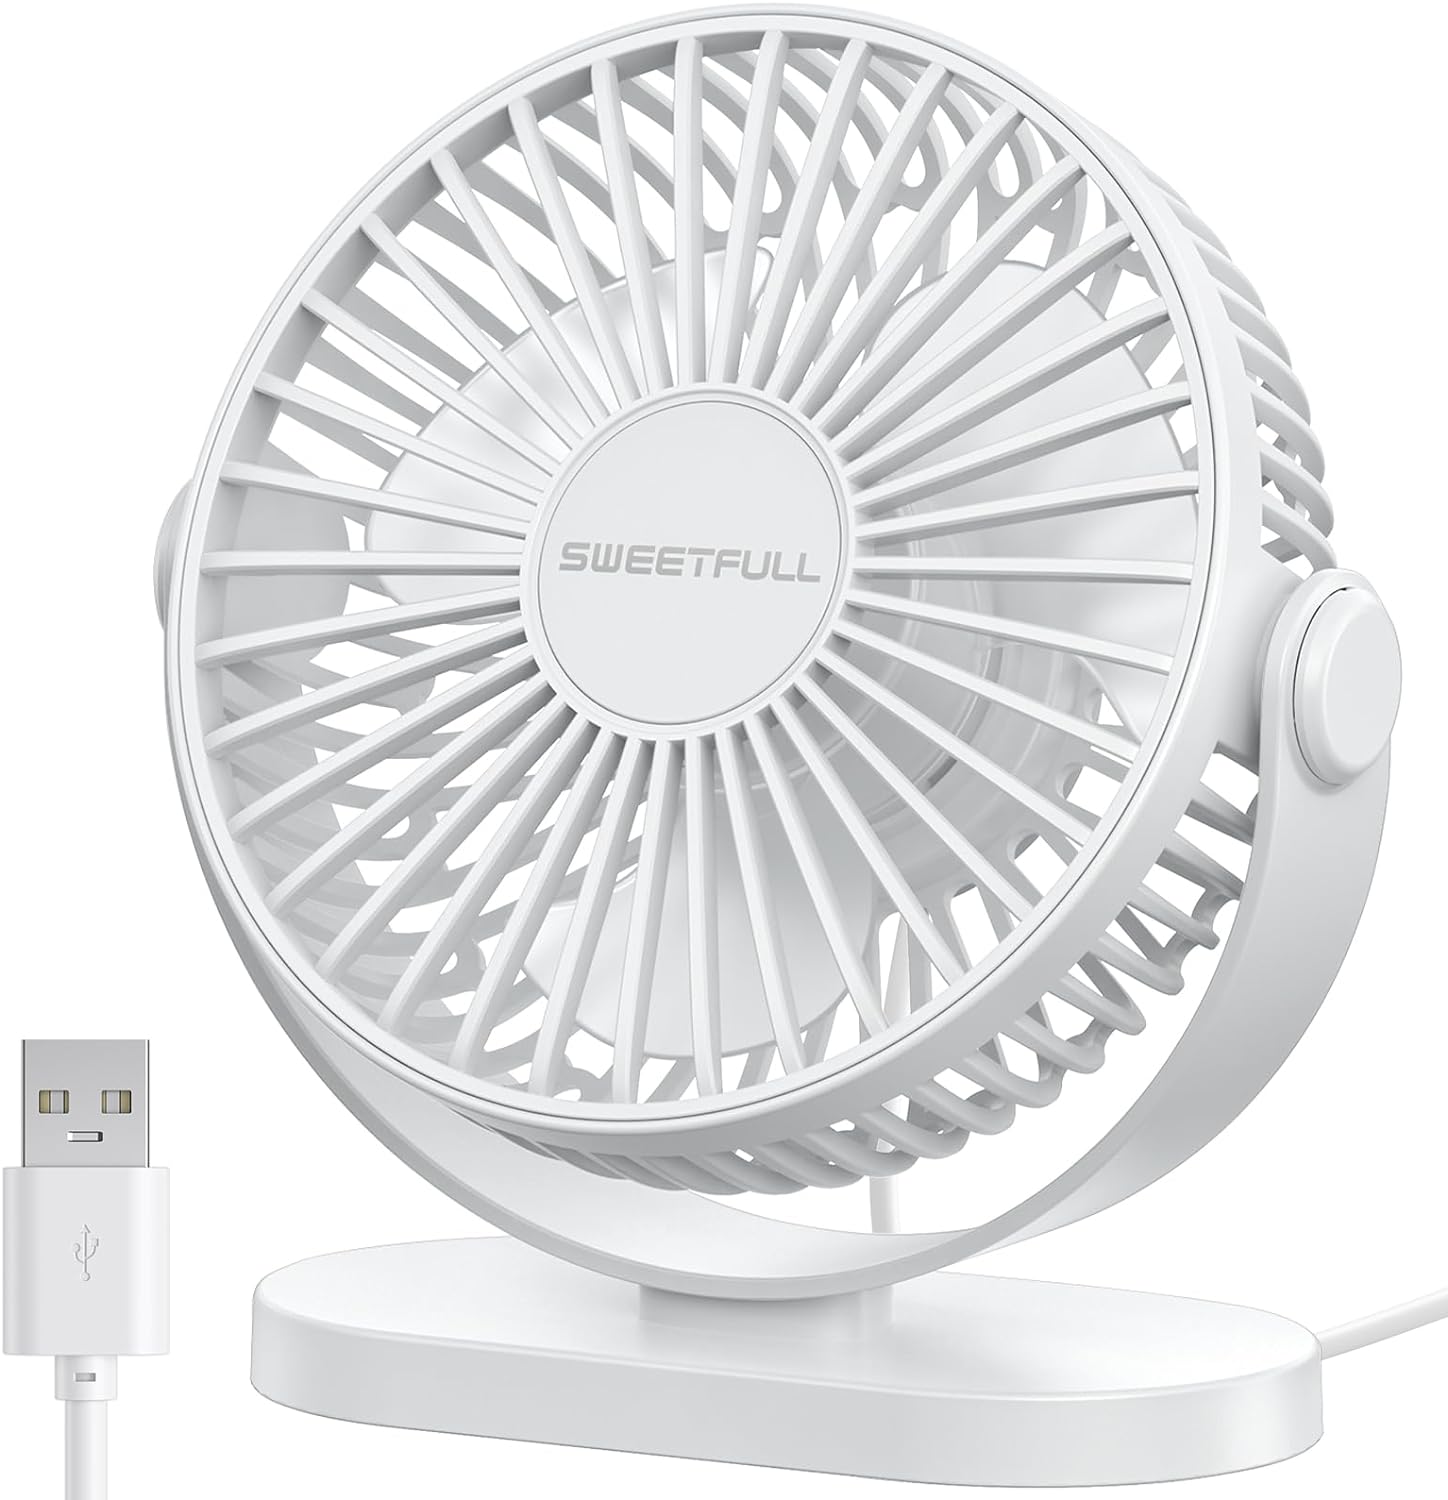 SWEETFULL USB Desk Fan Small Quiet - 3 Speeds Mini Personal Portable Fan 360 Rotation Adjustable, 5 Inch Office Table Cooling Gadgets on Desktop (White)